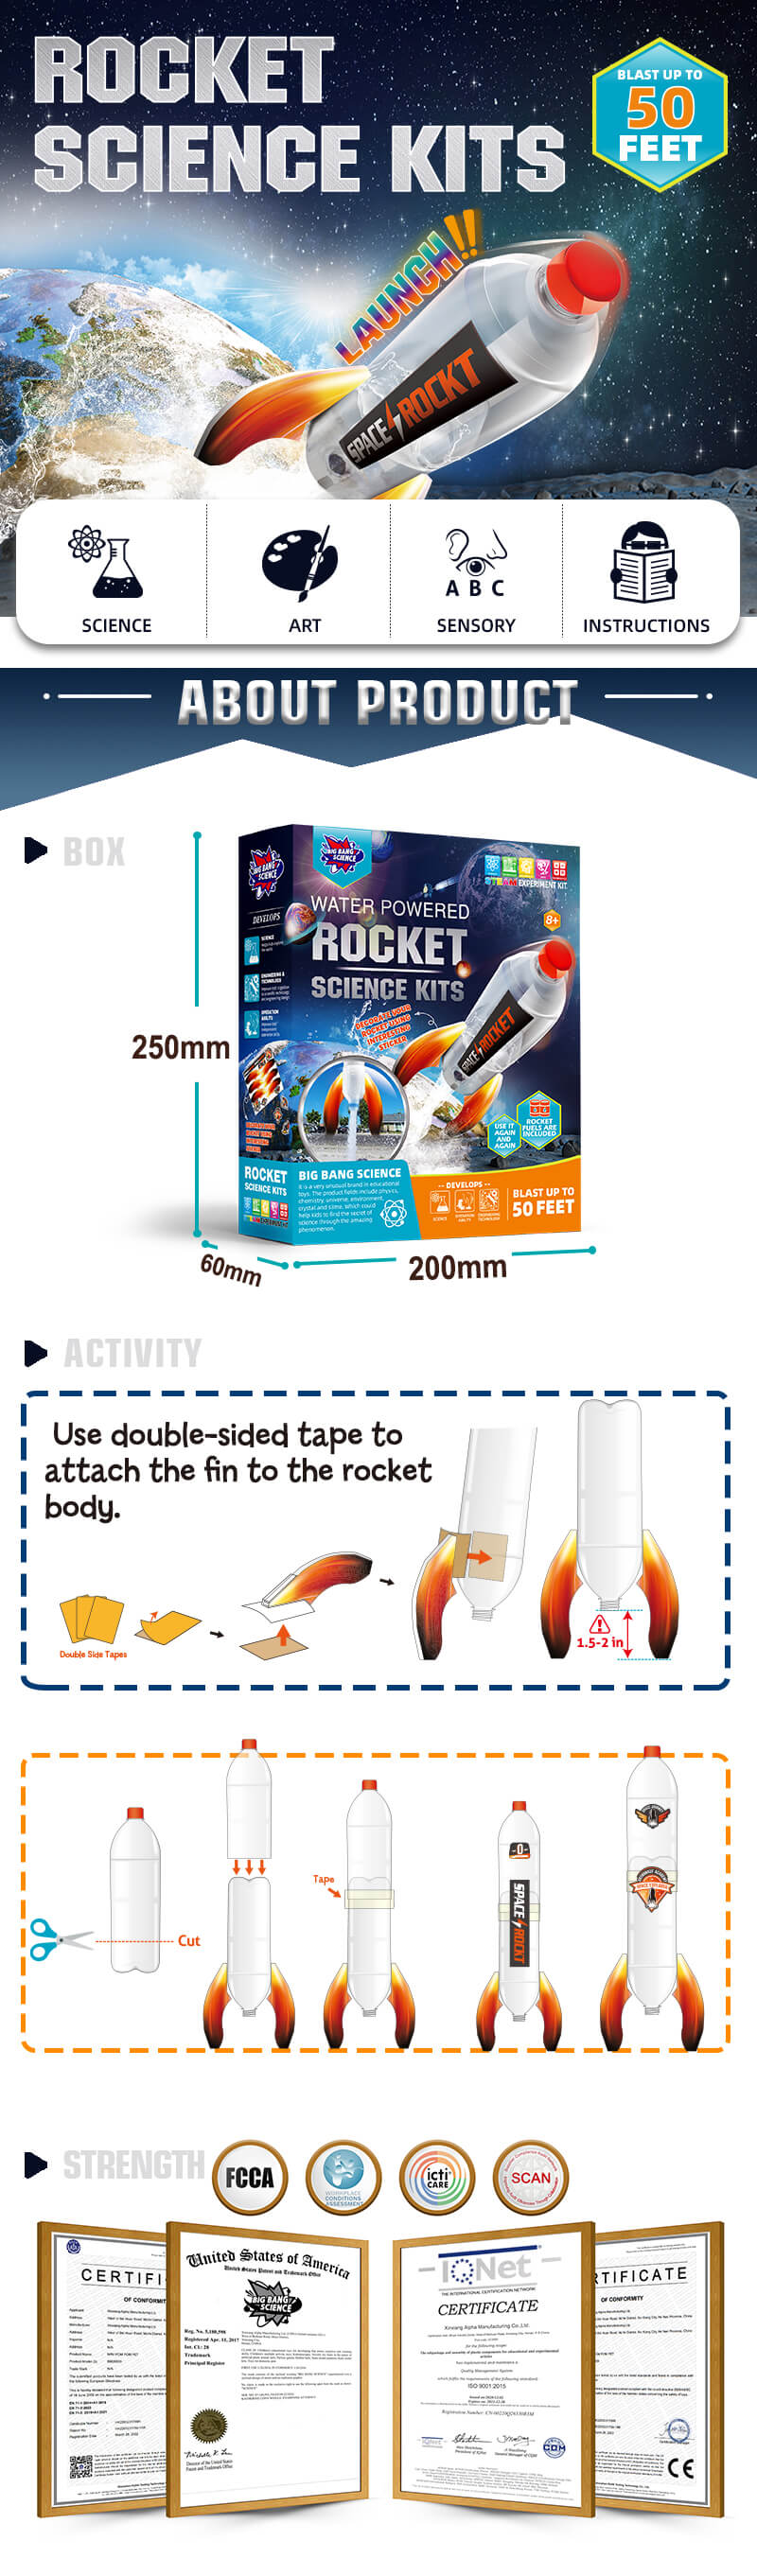 Rocket-Science-Kits-New-Arrivals-Product-details-chart